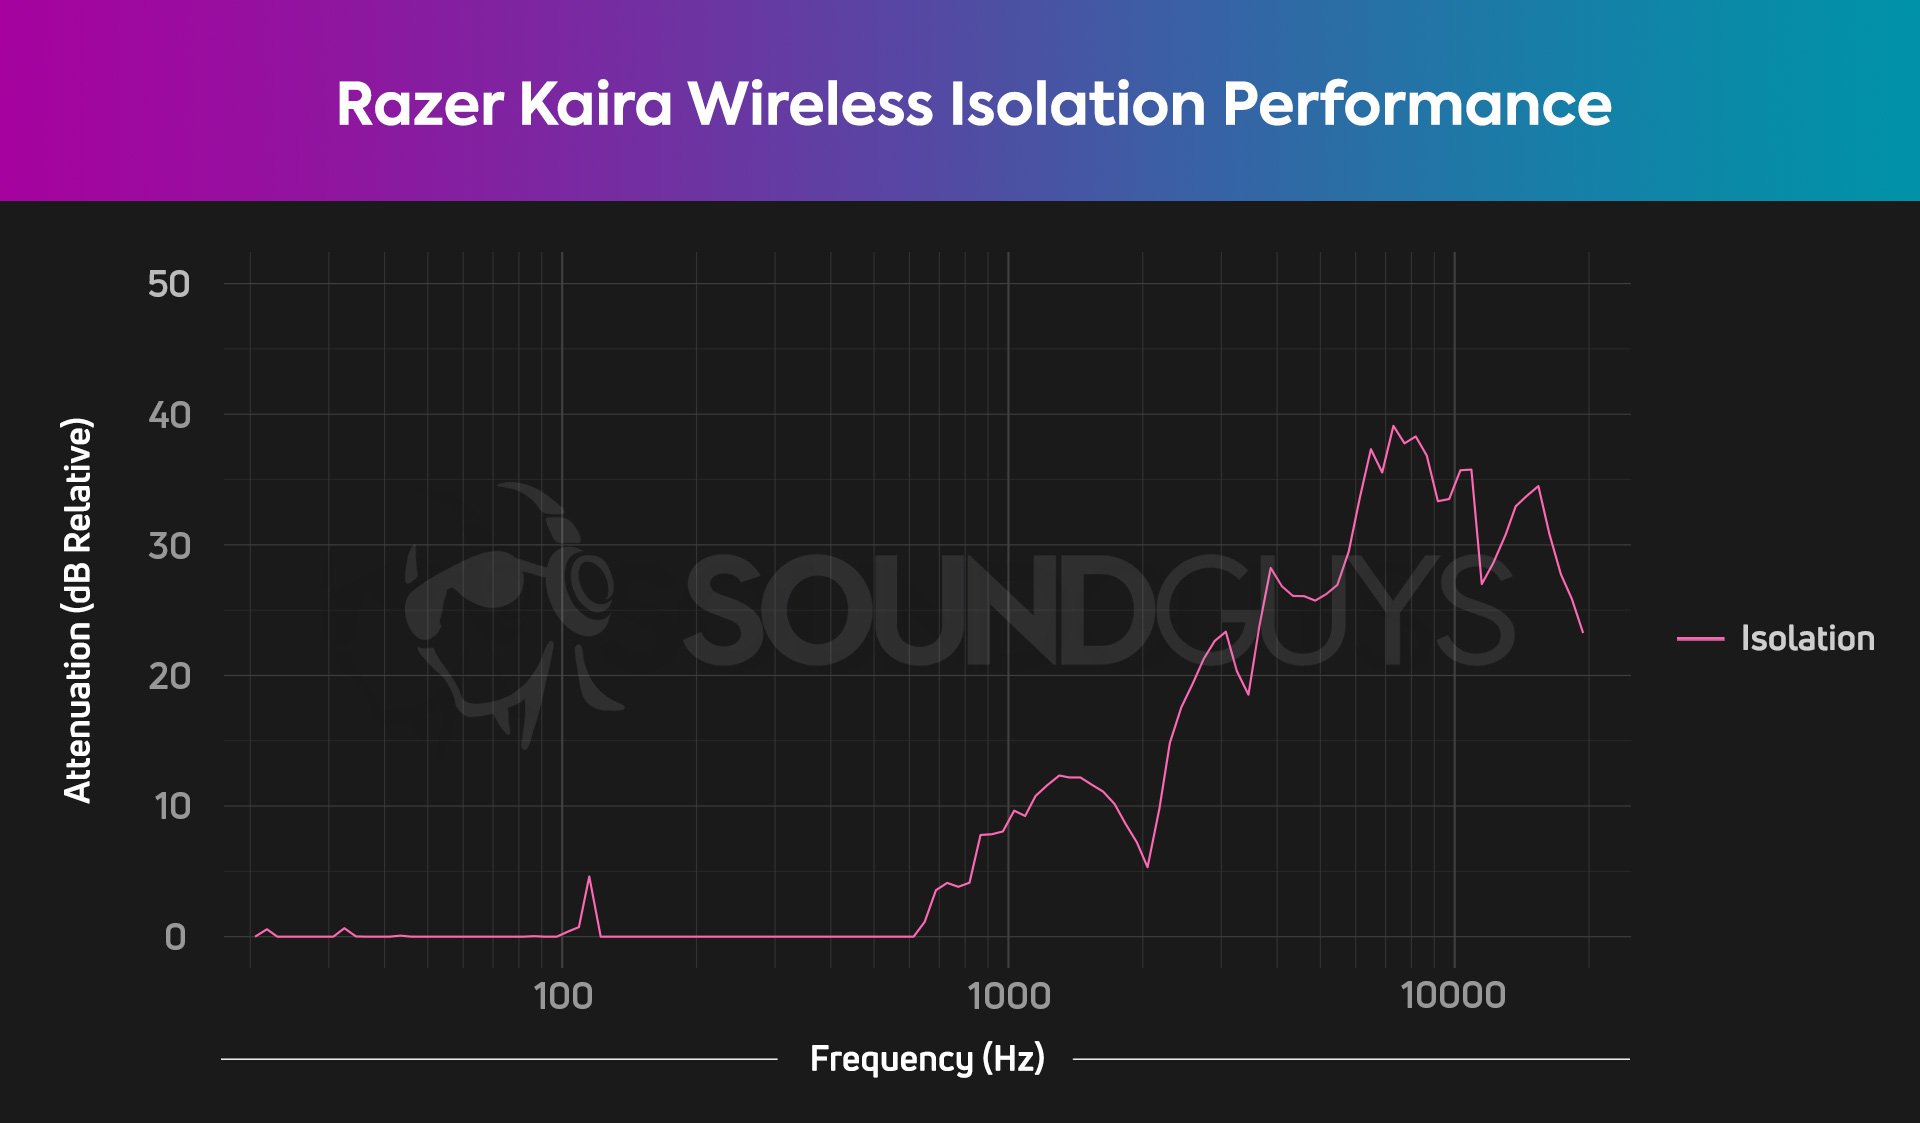 An isolation chart for the Razer Kaira Wireless shows that the gaming headset can effectively mitigate the loudness of sounds above 1kHz.